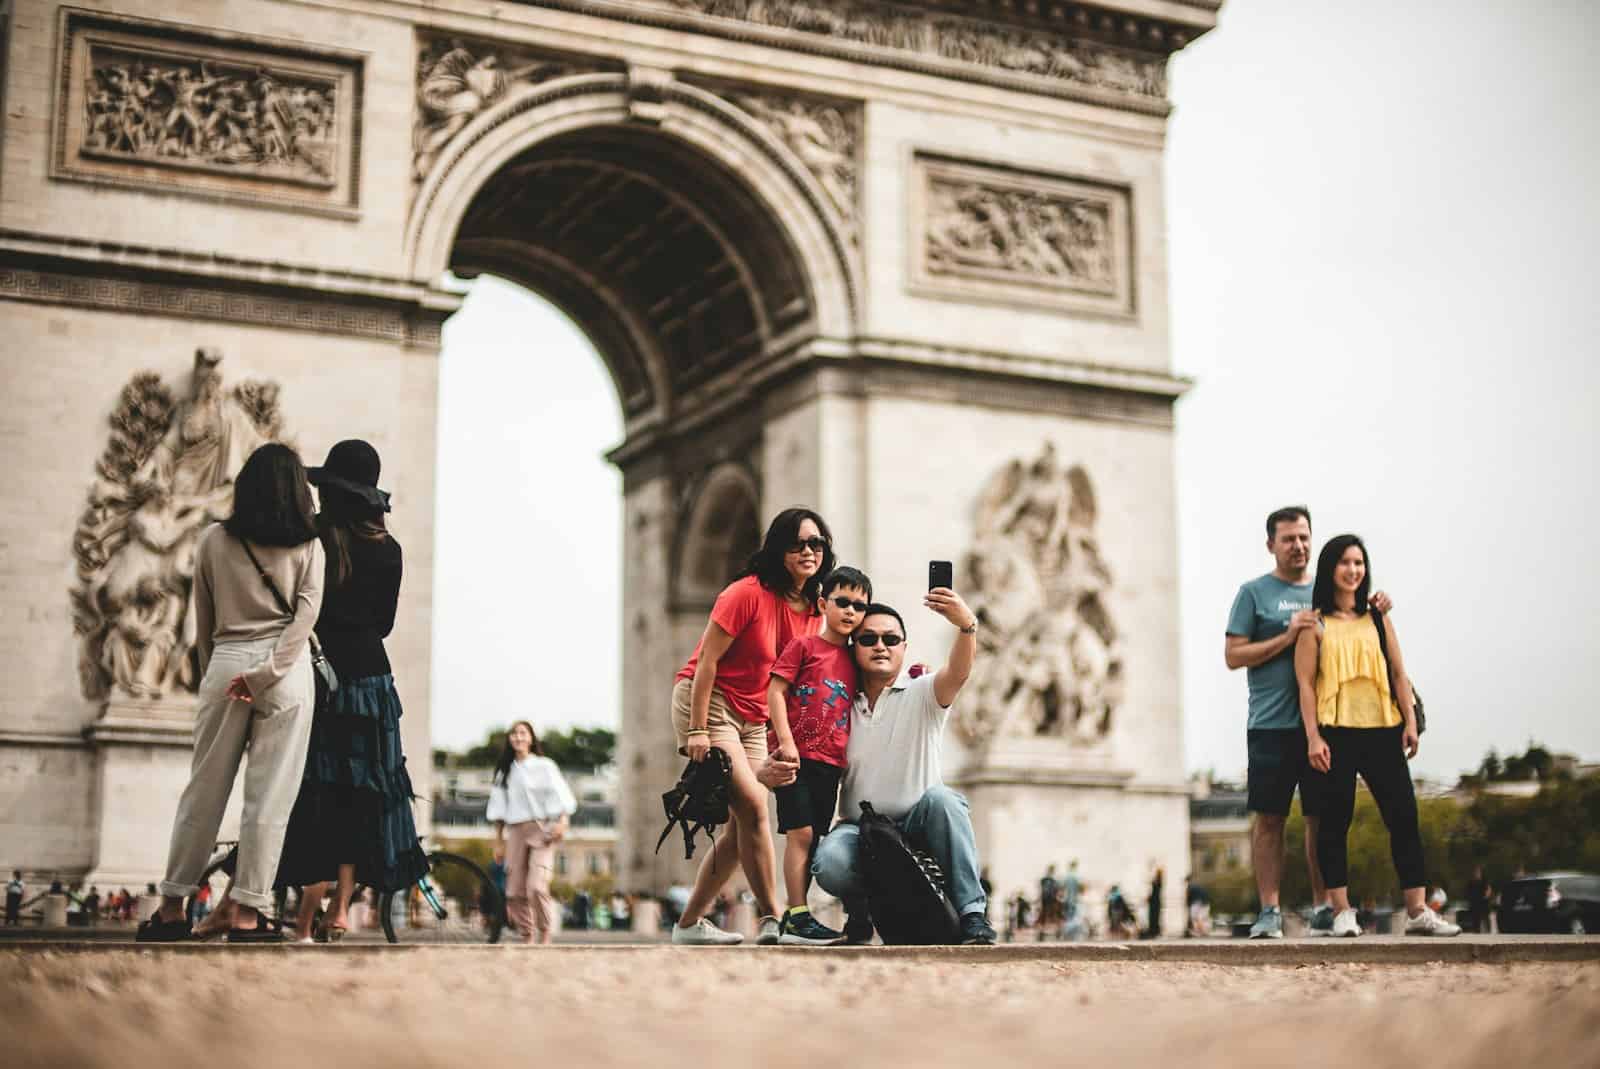 photography of family during daytime in front of the Arc de Triomphe taking a selfie photo.